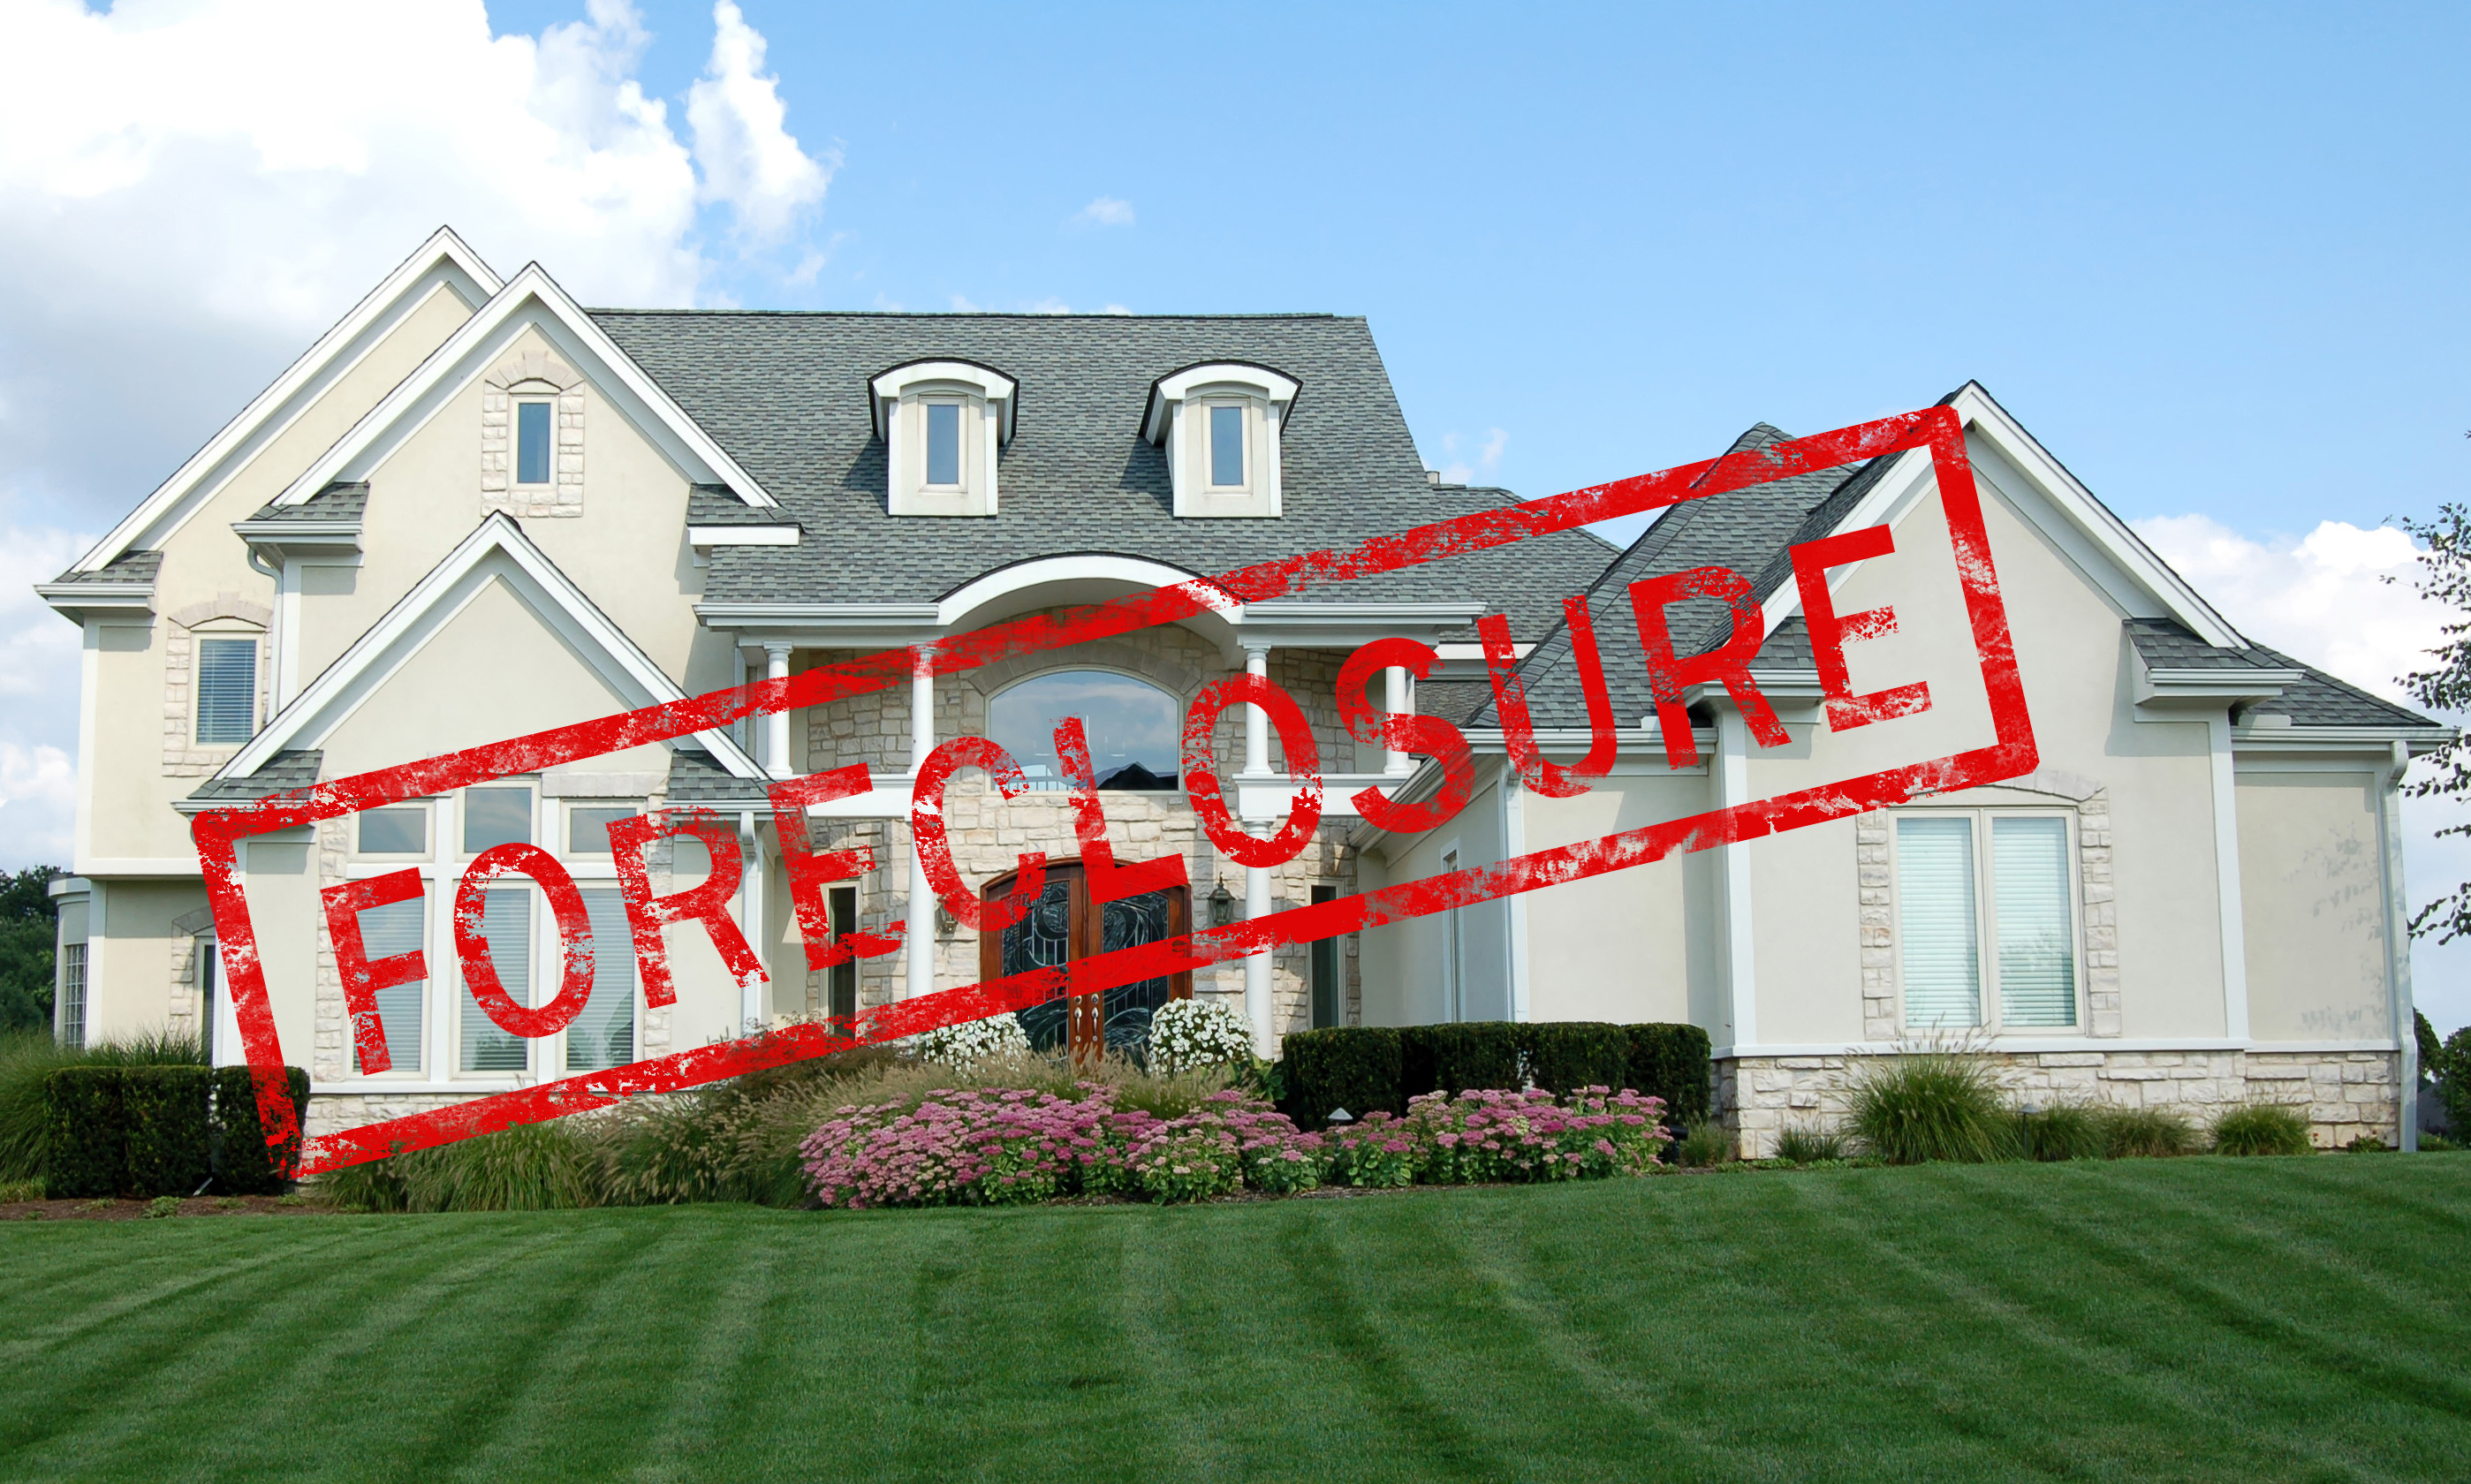 Call T.H.E. Appraisers when you need appraisals on Hardin foreclosures